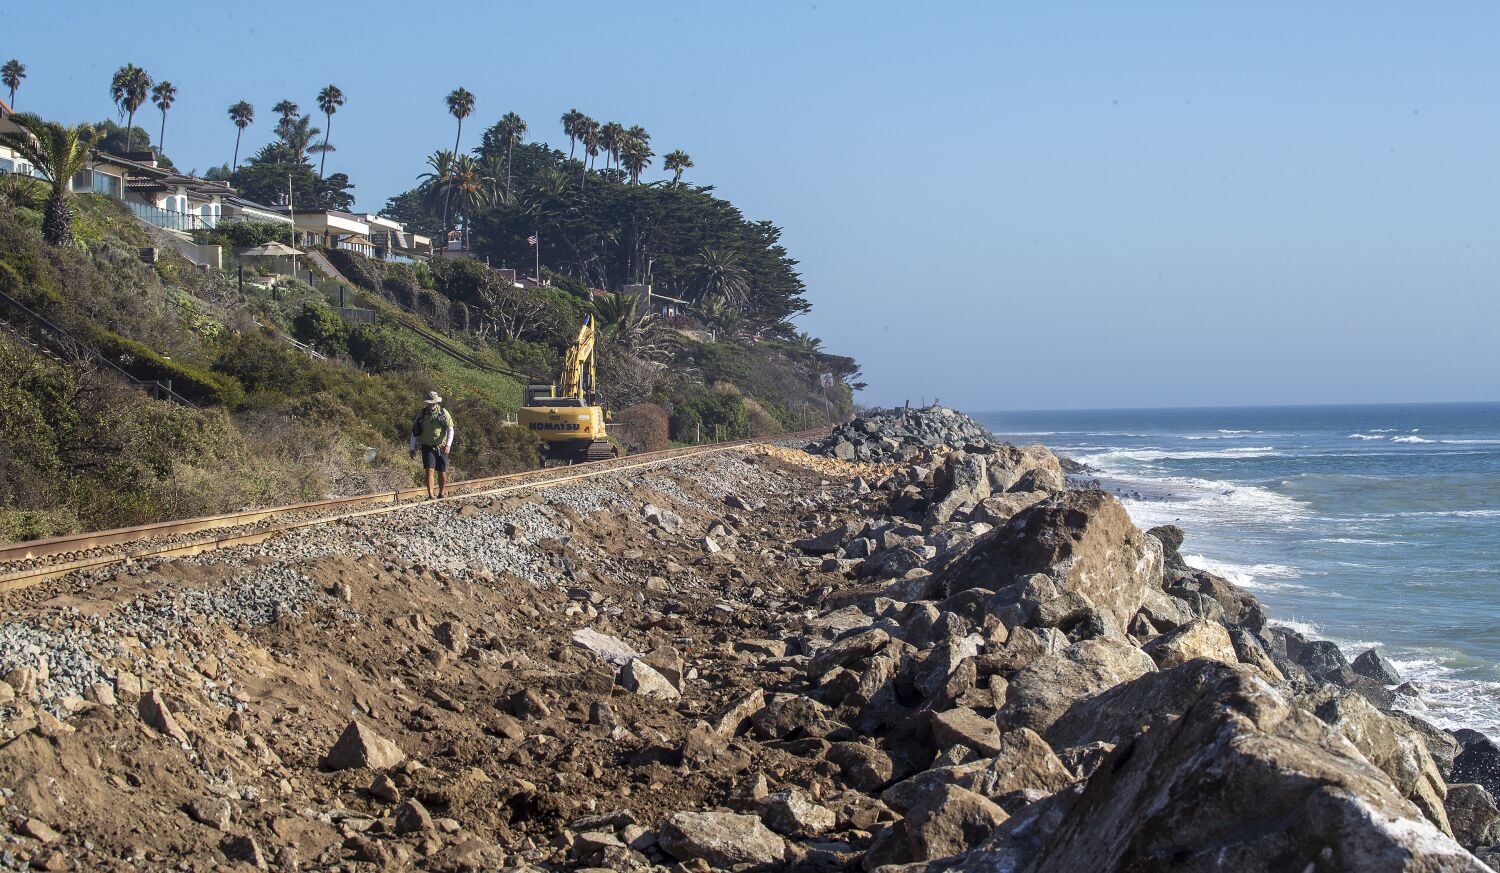 How an 'ancient landslide' keeps threatening a railroad, homes in San Clemente